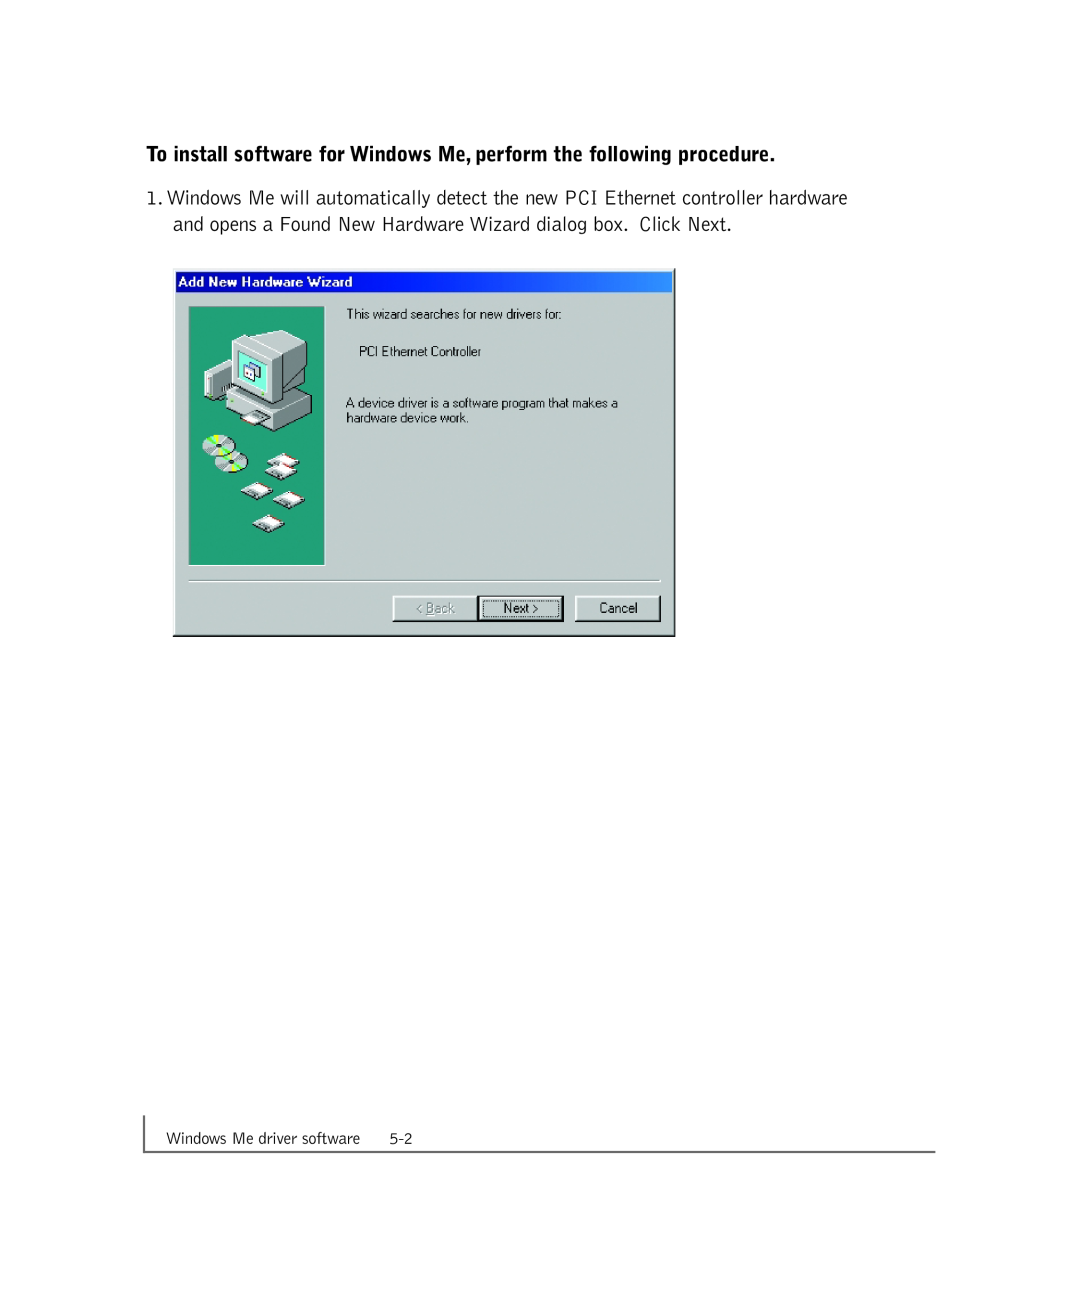 NETGEAR GA302T manual To install software for Windows Me, perform the following procedure, Windows Me driver software 